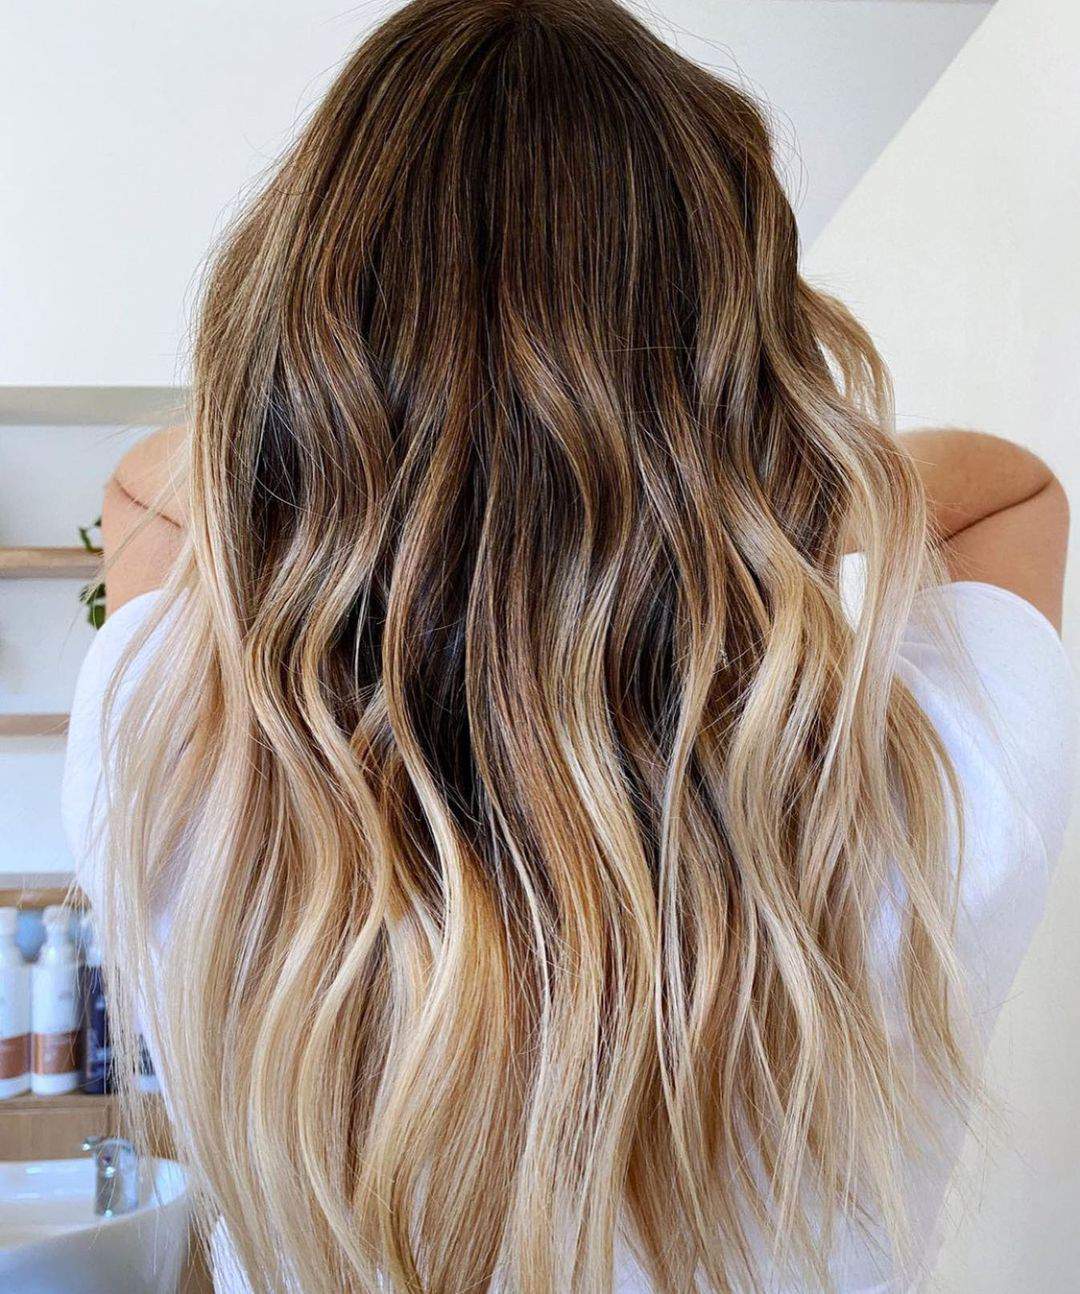 40+ Awesome Hairstyles For Girls With Long Hair images 4